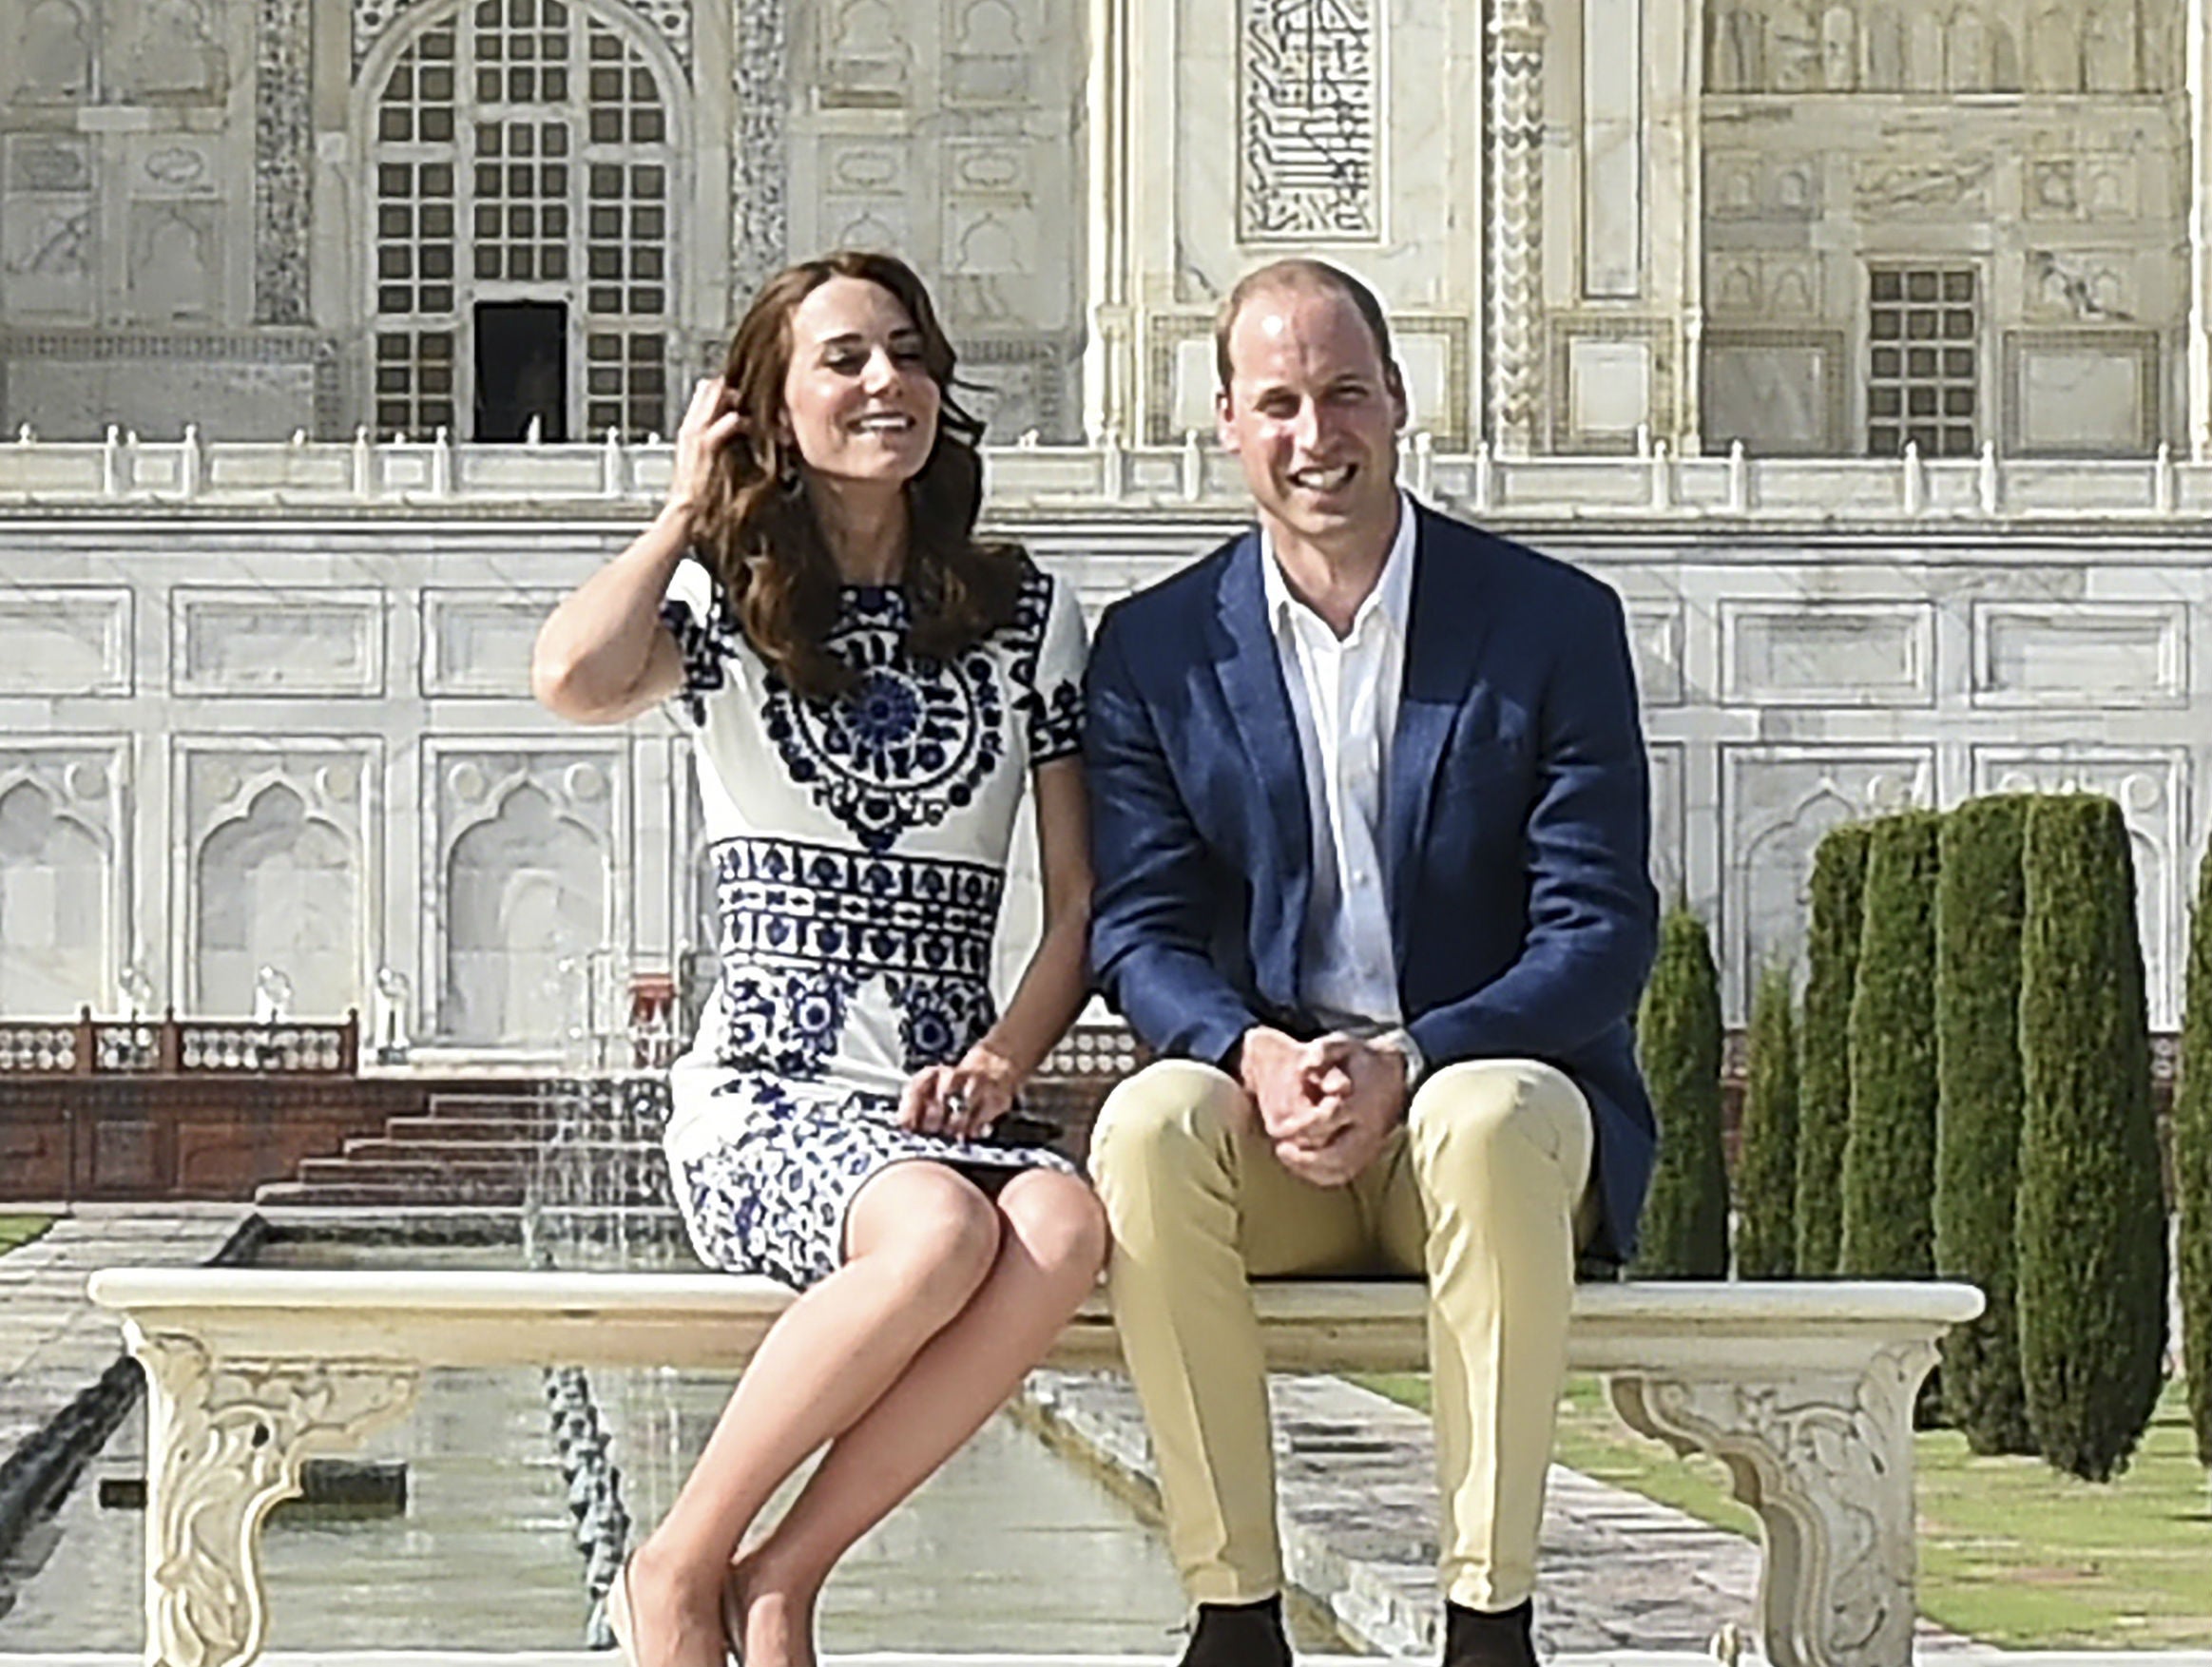 The Duke and Duchess of Cambridge sat on the same bench where Princess Diana had posed in 1992